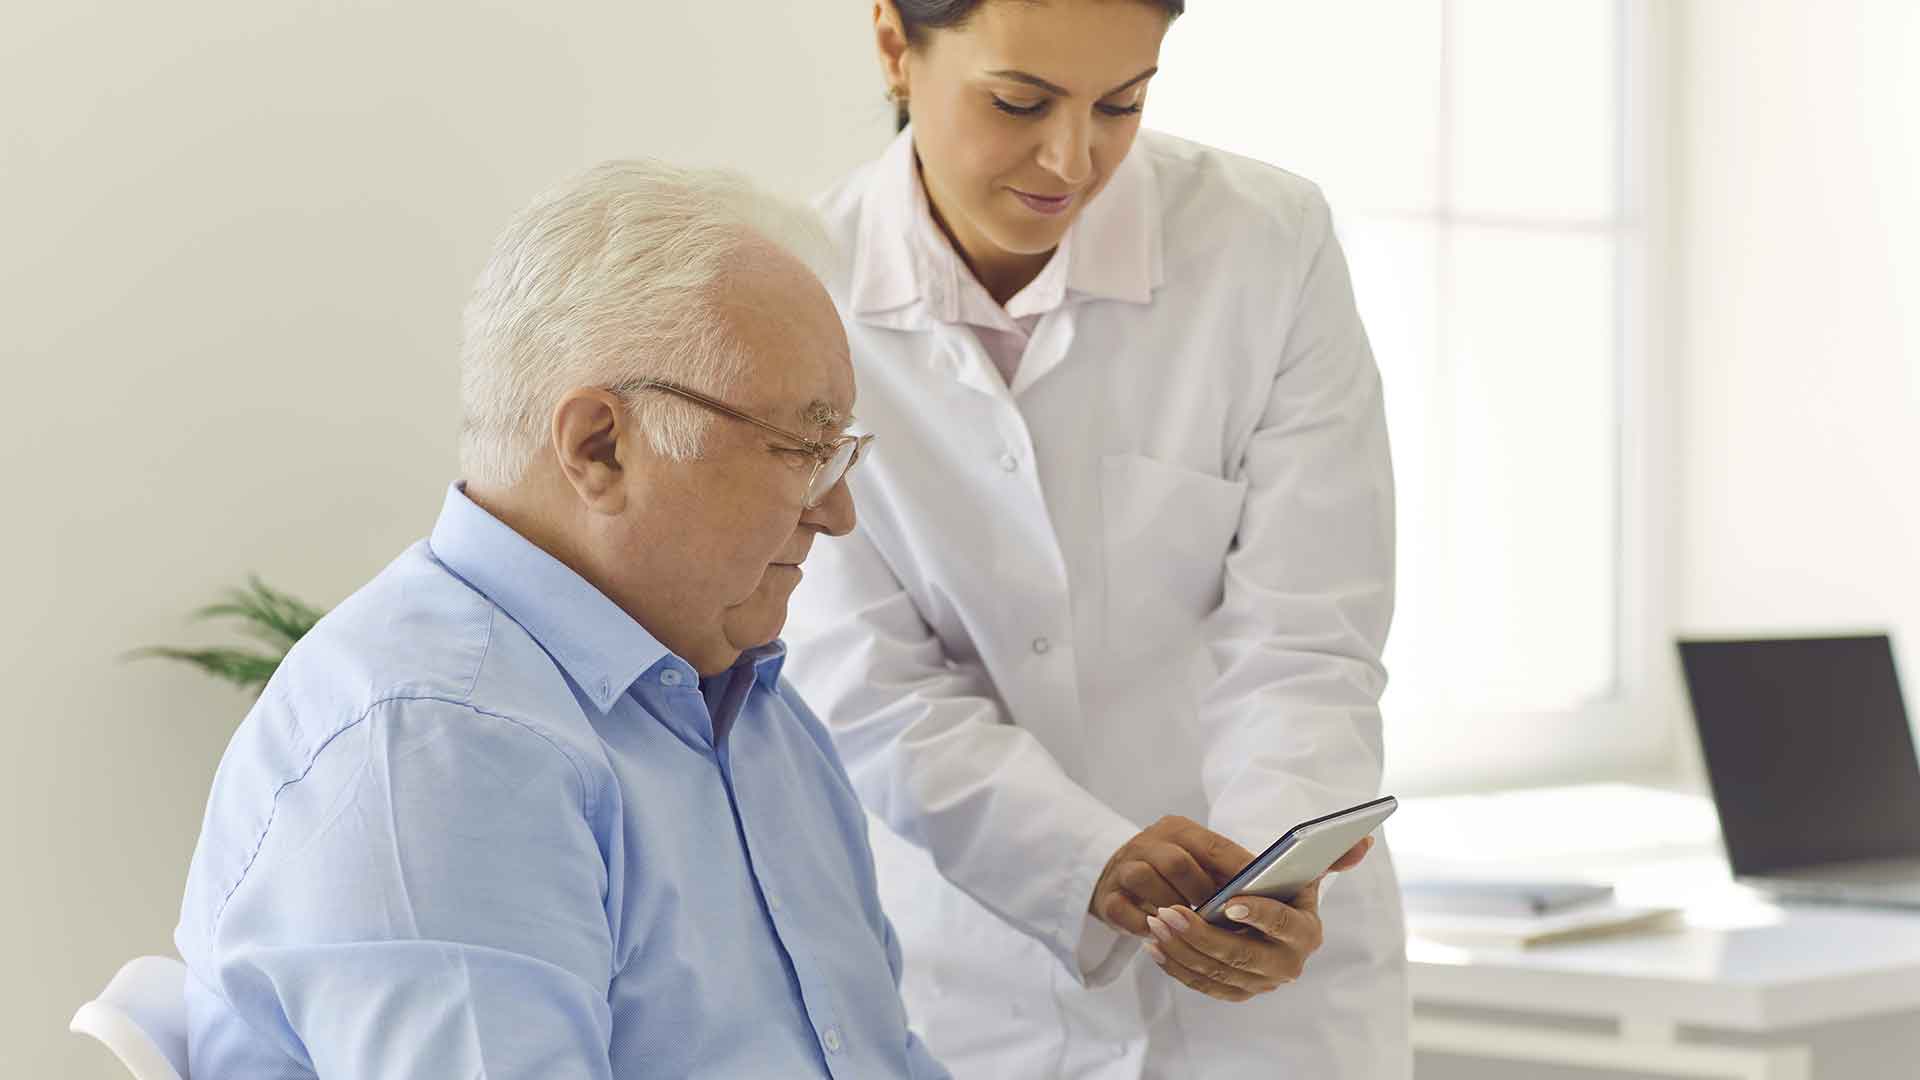 female doctor showing support text messages to elder patient